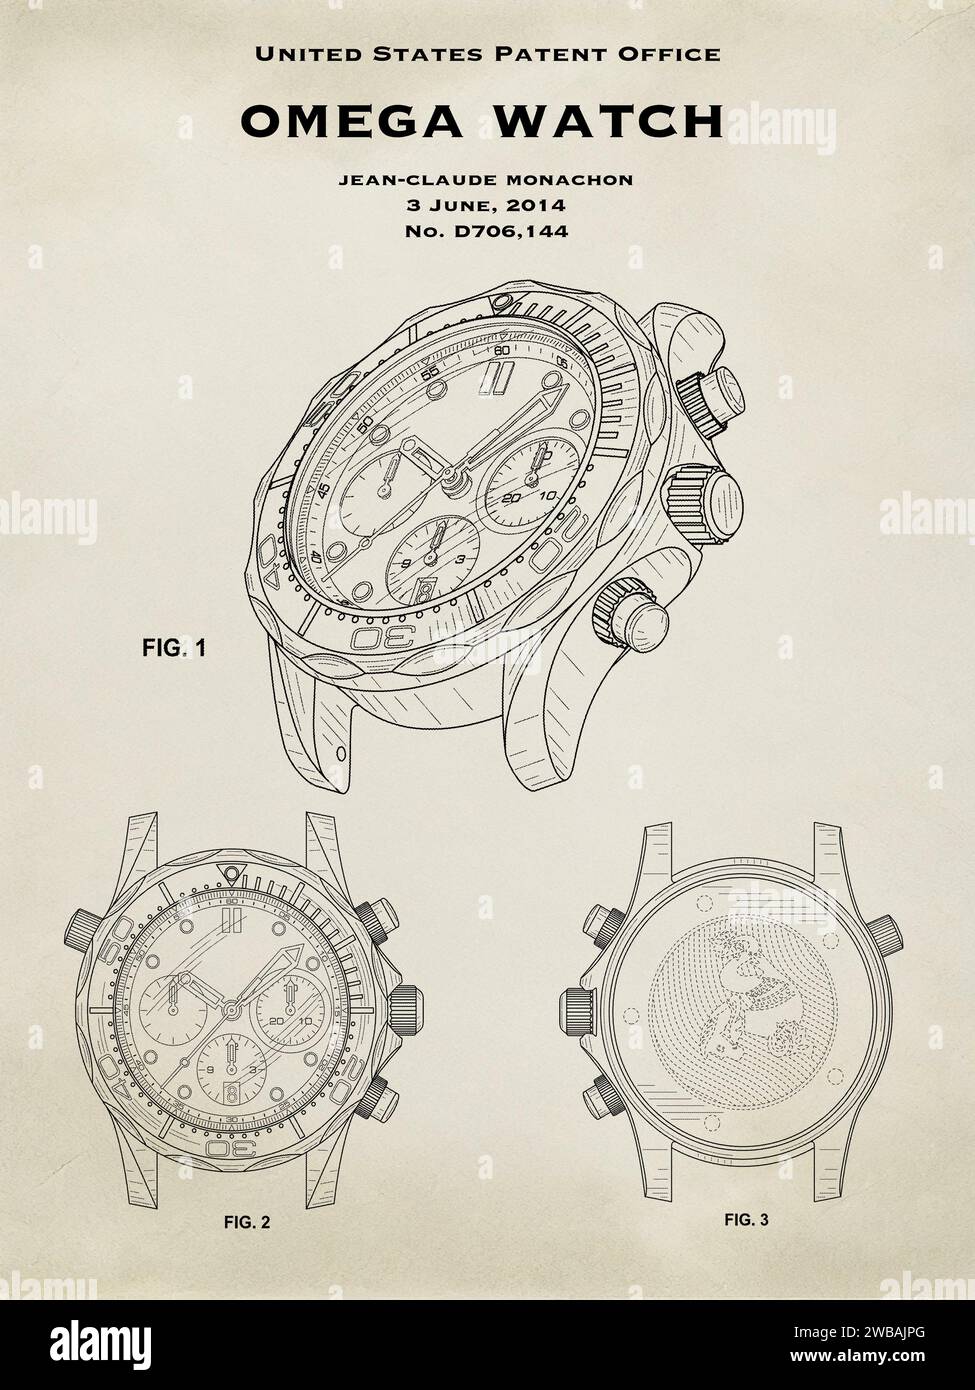 US patent design from 2014 for an Omega dive watch design on a neutral background Stock Photo